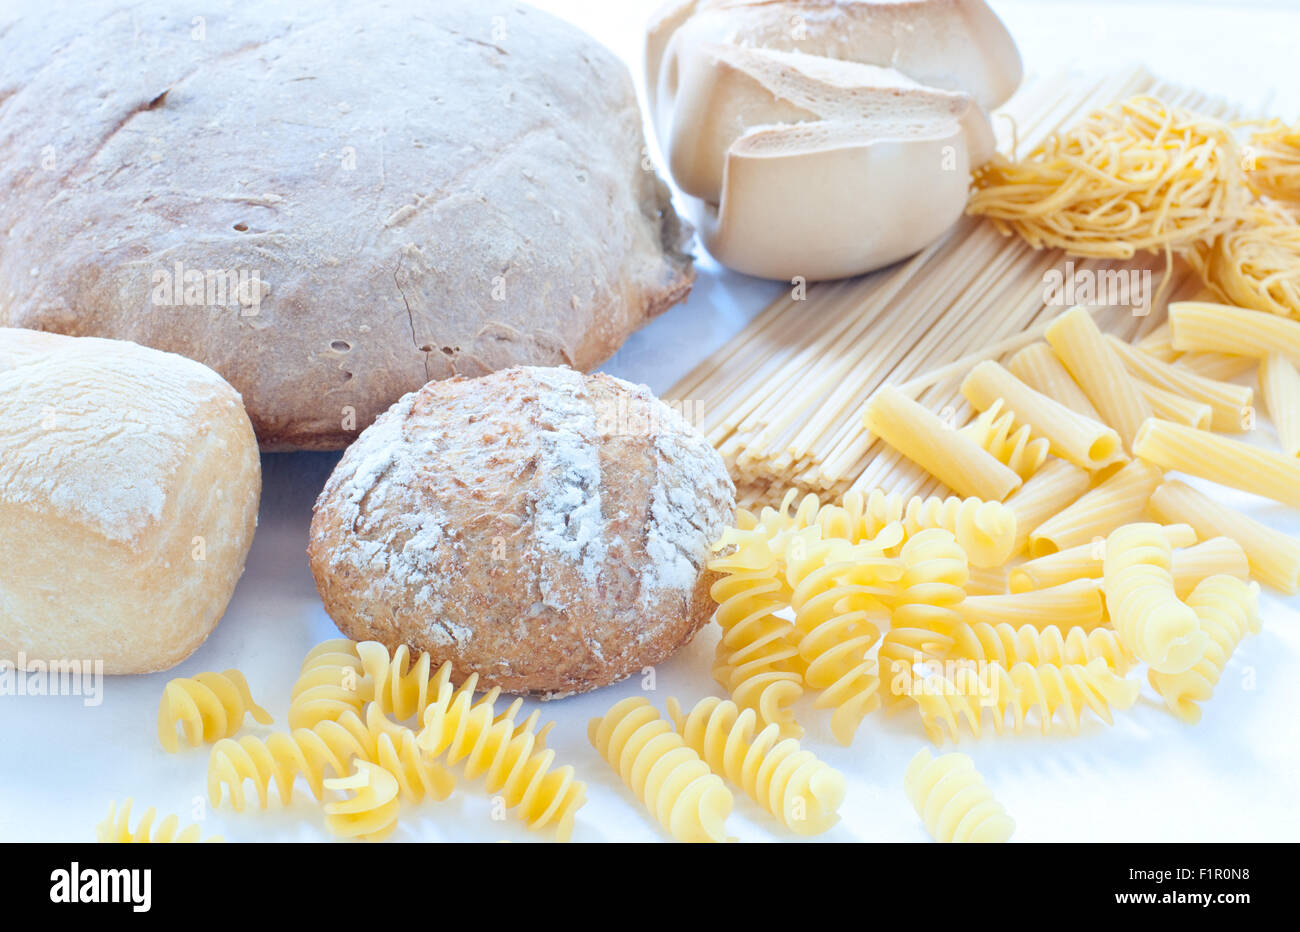 Different varieties of Italian pasta and homemade bread Stock Photo